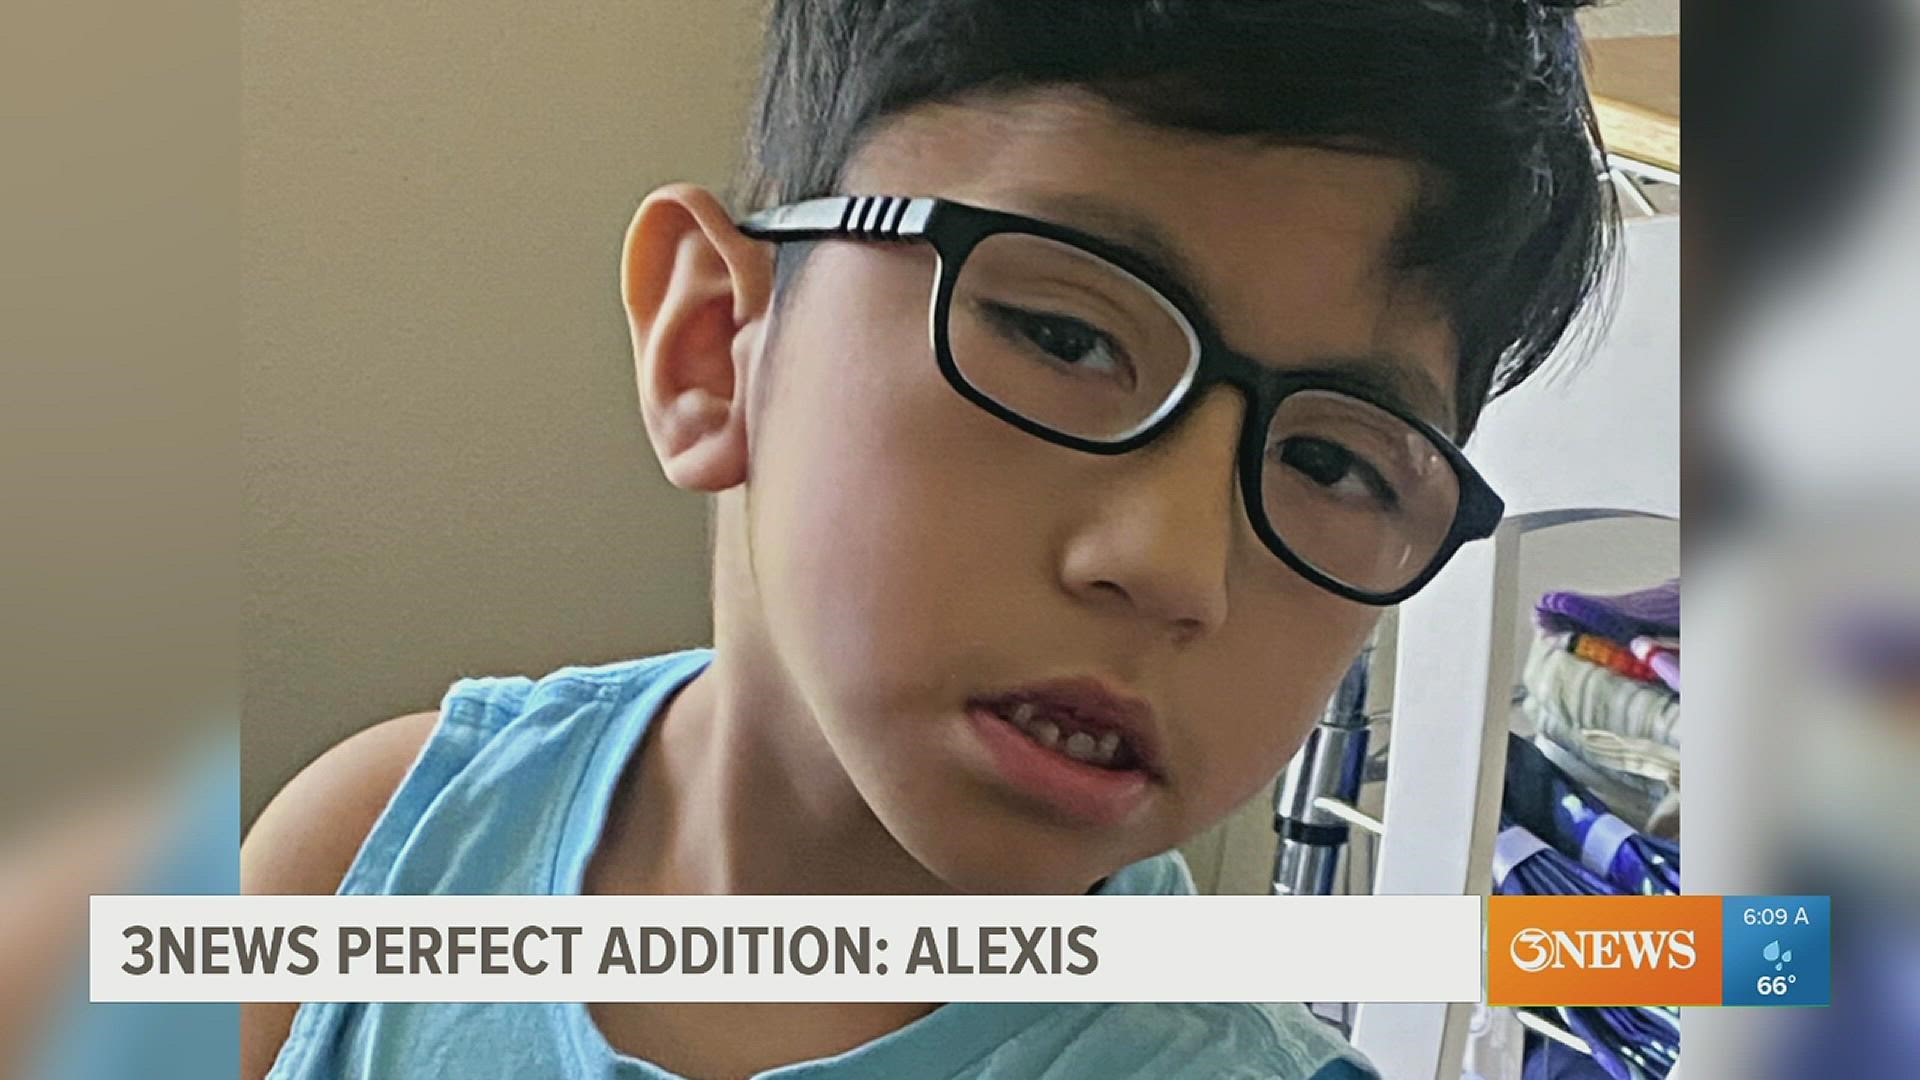 4-year-old Alexis is a playful preschooler with a great willingness to learn and could be the Perfect Addition to your family.